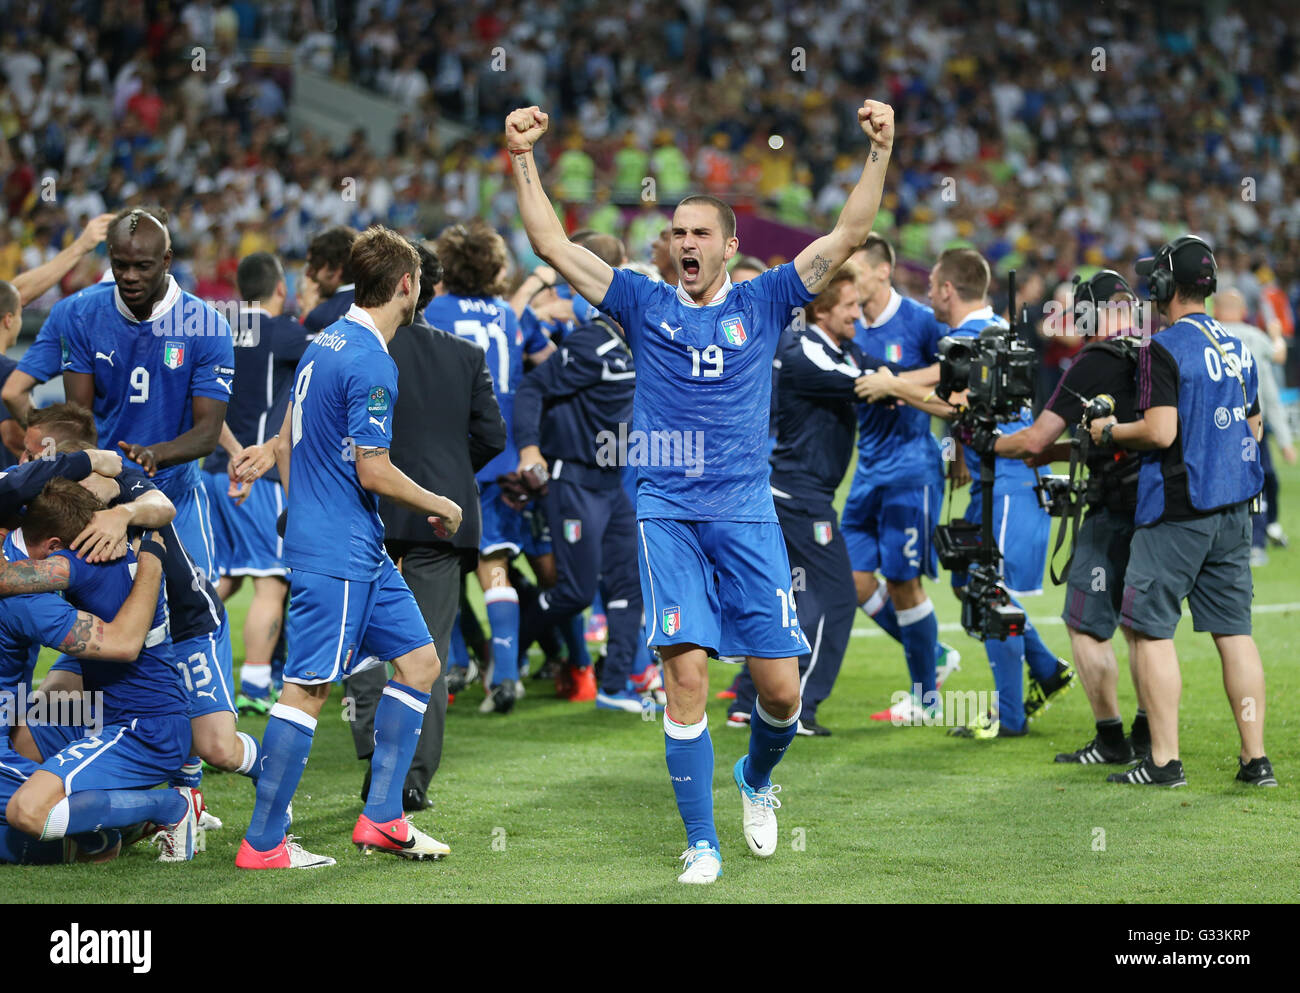 KYIV, UKRAINE - JUNE 24, 2012: Players of Italy national football team celebrate their winning after the UEFA EURO 2012 Quarter-final game against England at NSC Olympic stadium in Kyiv Stock Photo